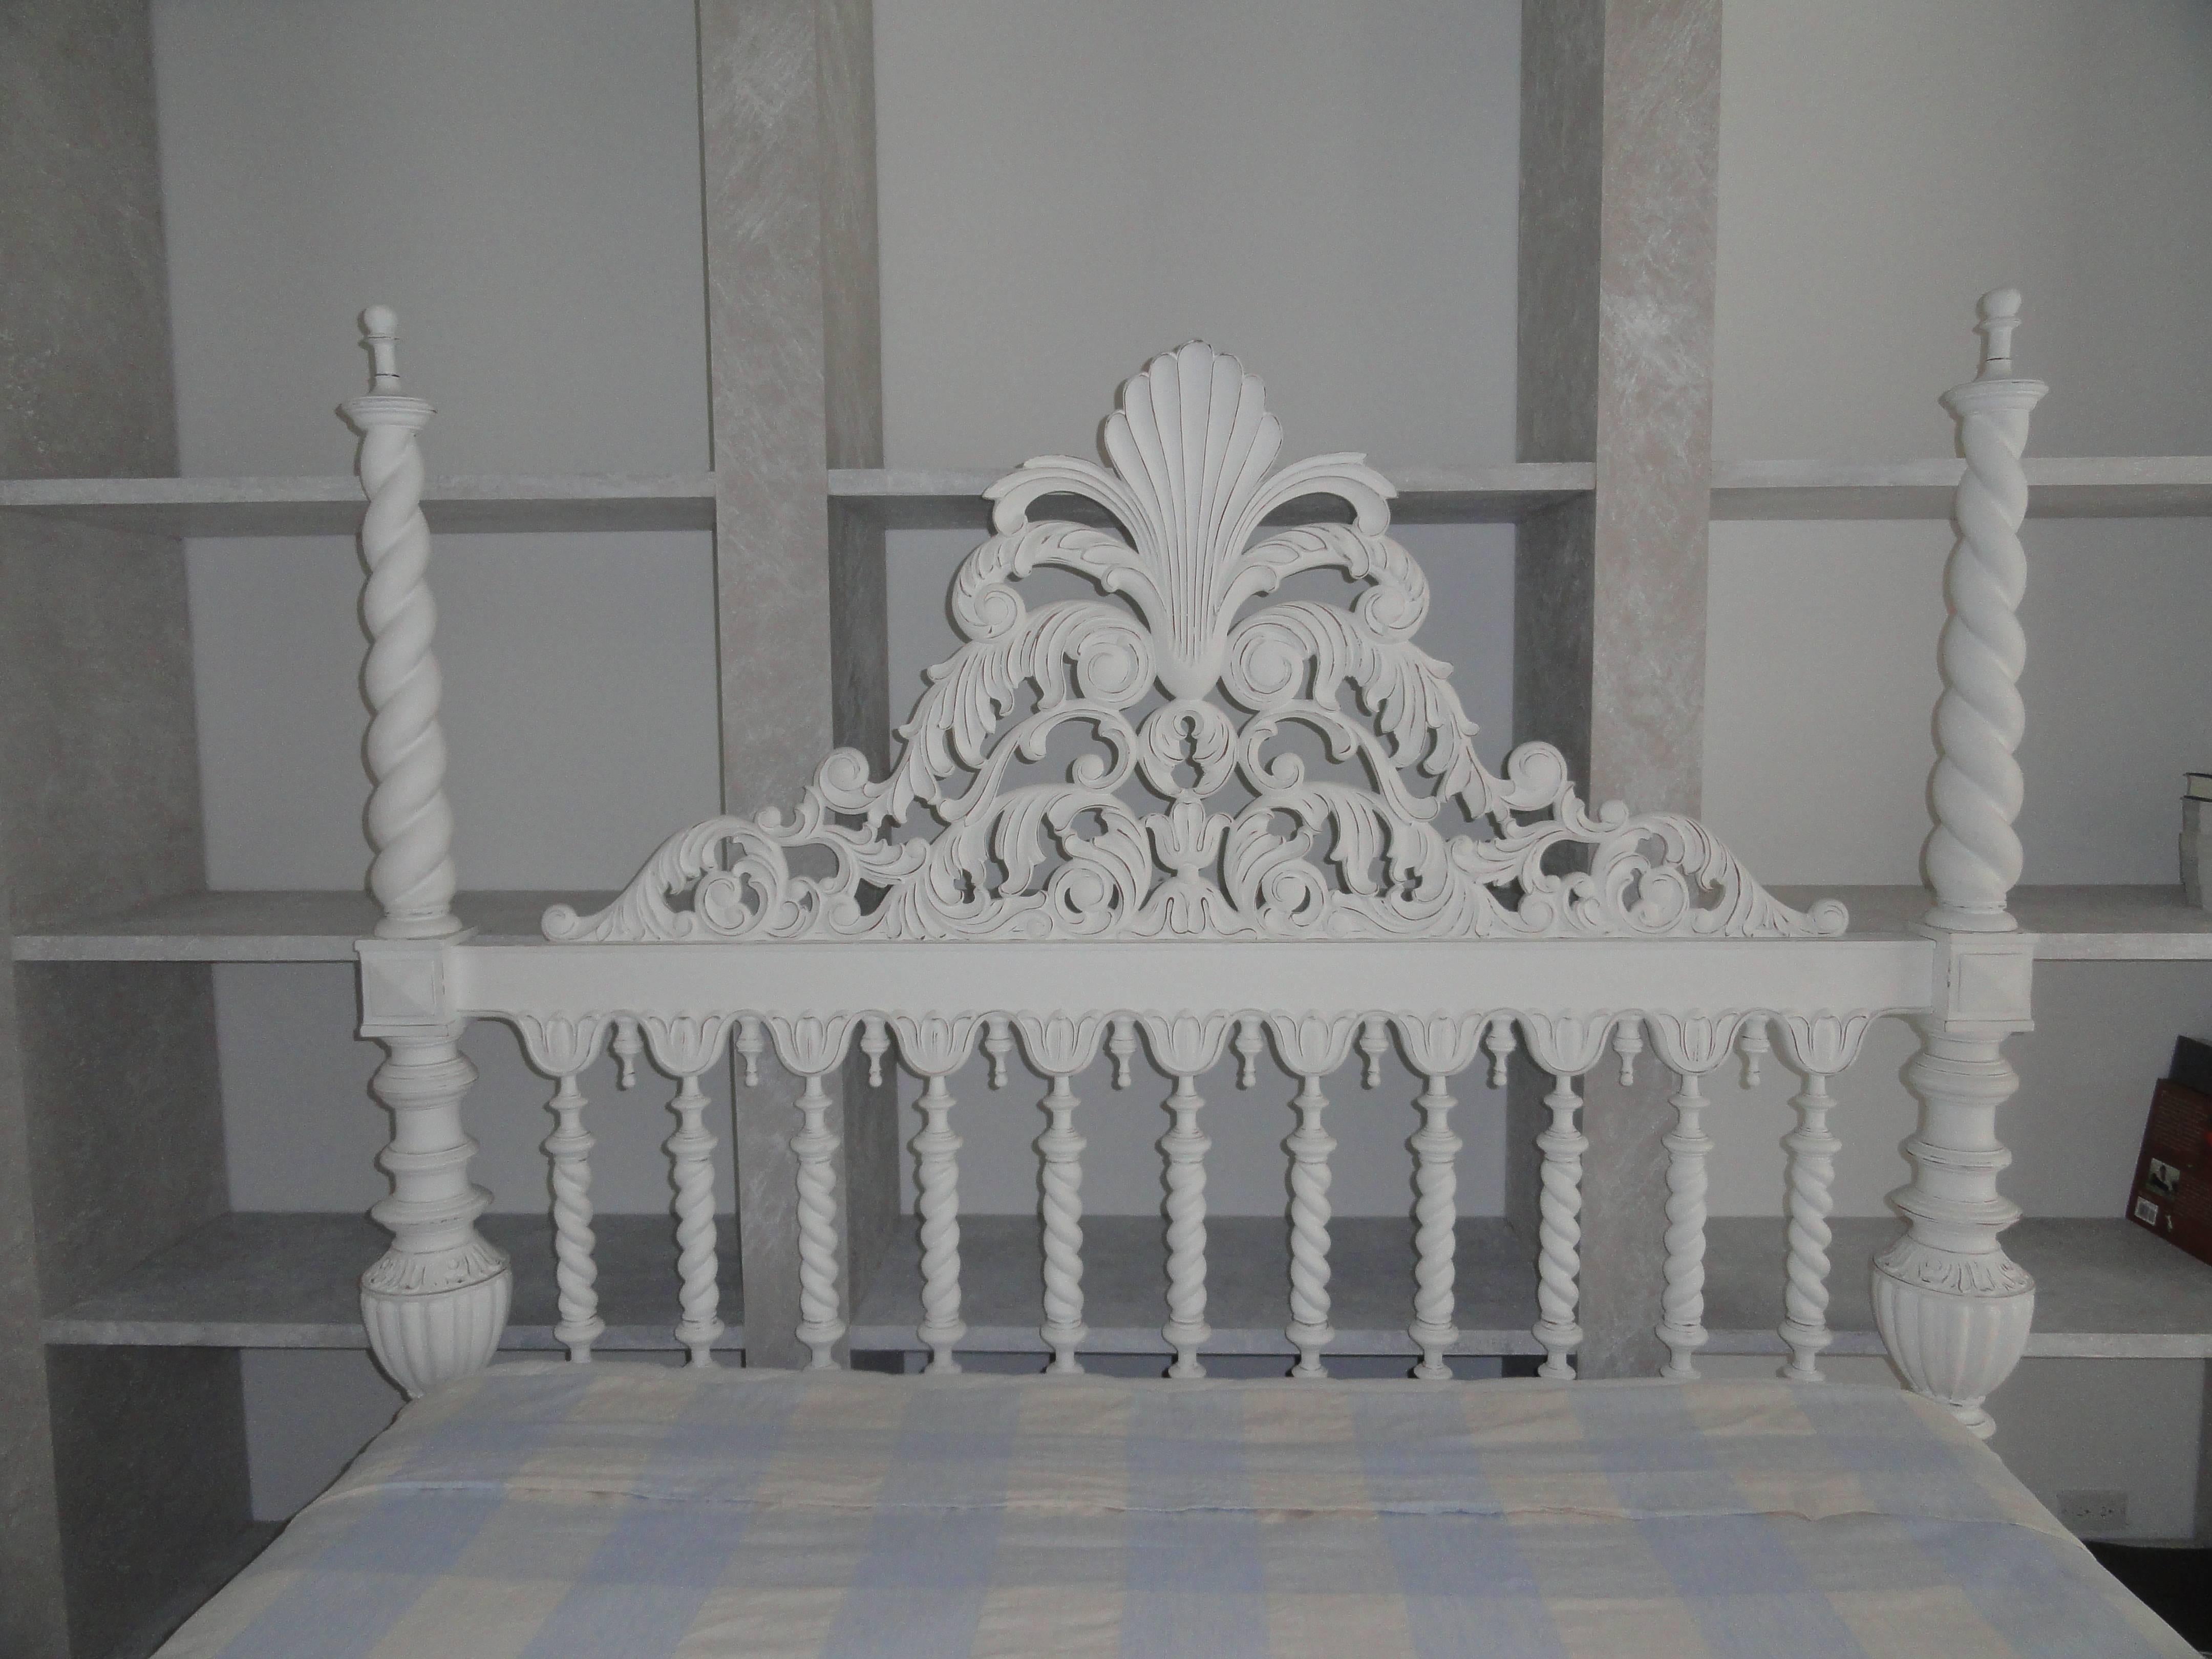 King-size plantation style four-poster wood bed. Head board features twist columns with an elegant carved cartouche. Four posters are carved wood in twist pattern. Beautiful detail on base of bed.
Custom white painted finish. Bed frame only. Does